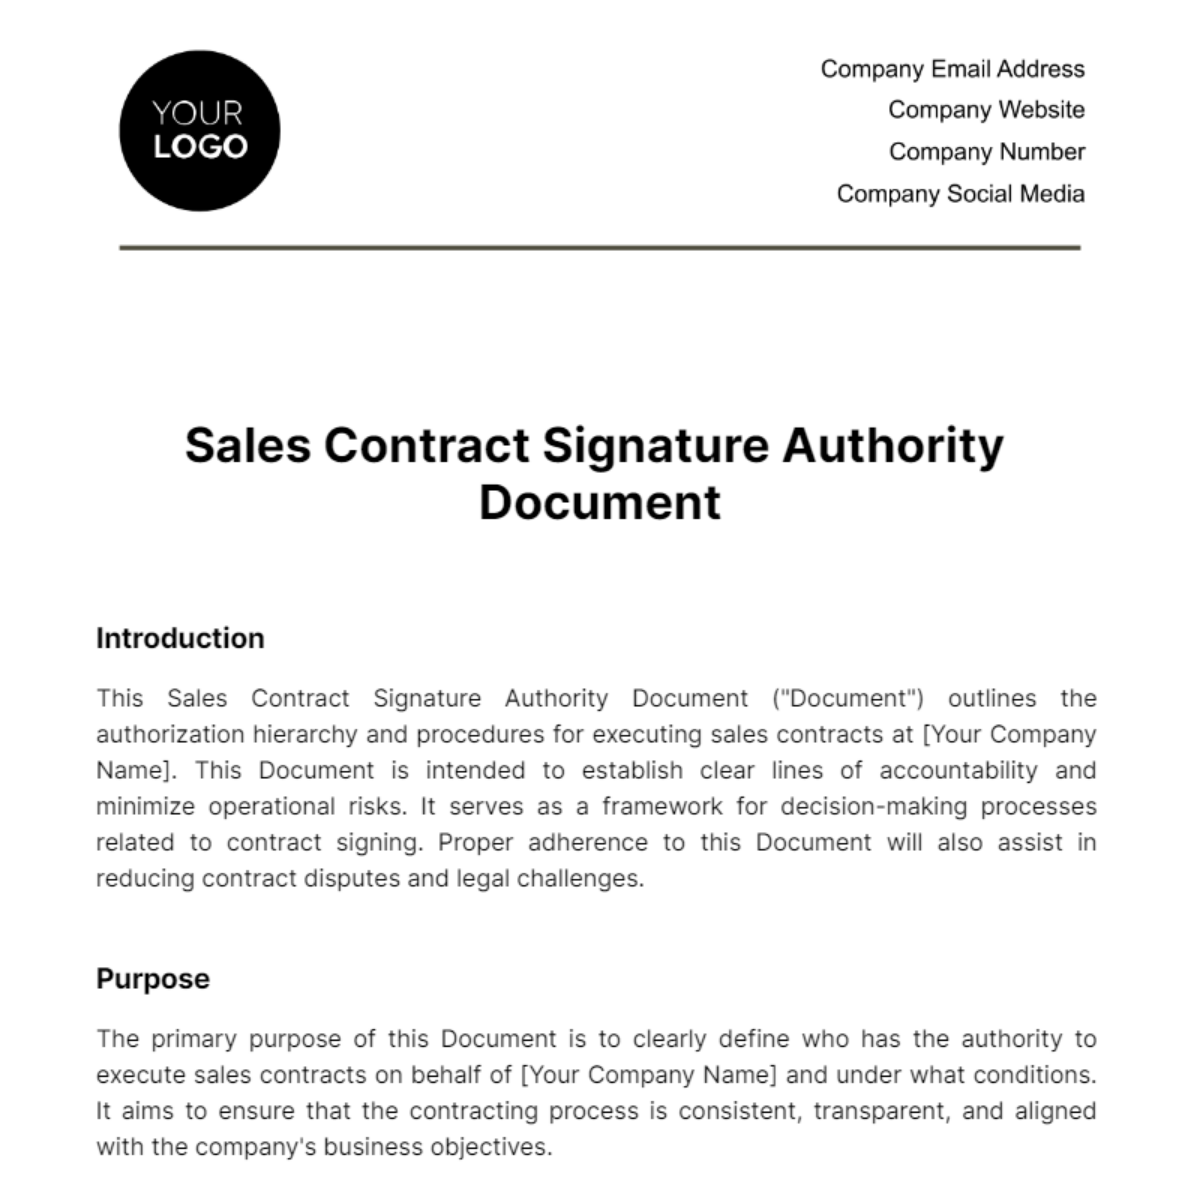 Sales Contract Signature Authority Document Template